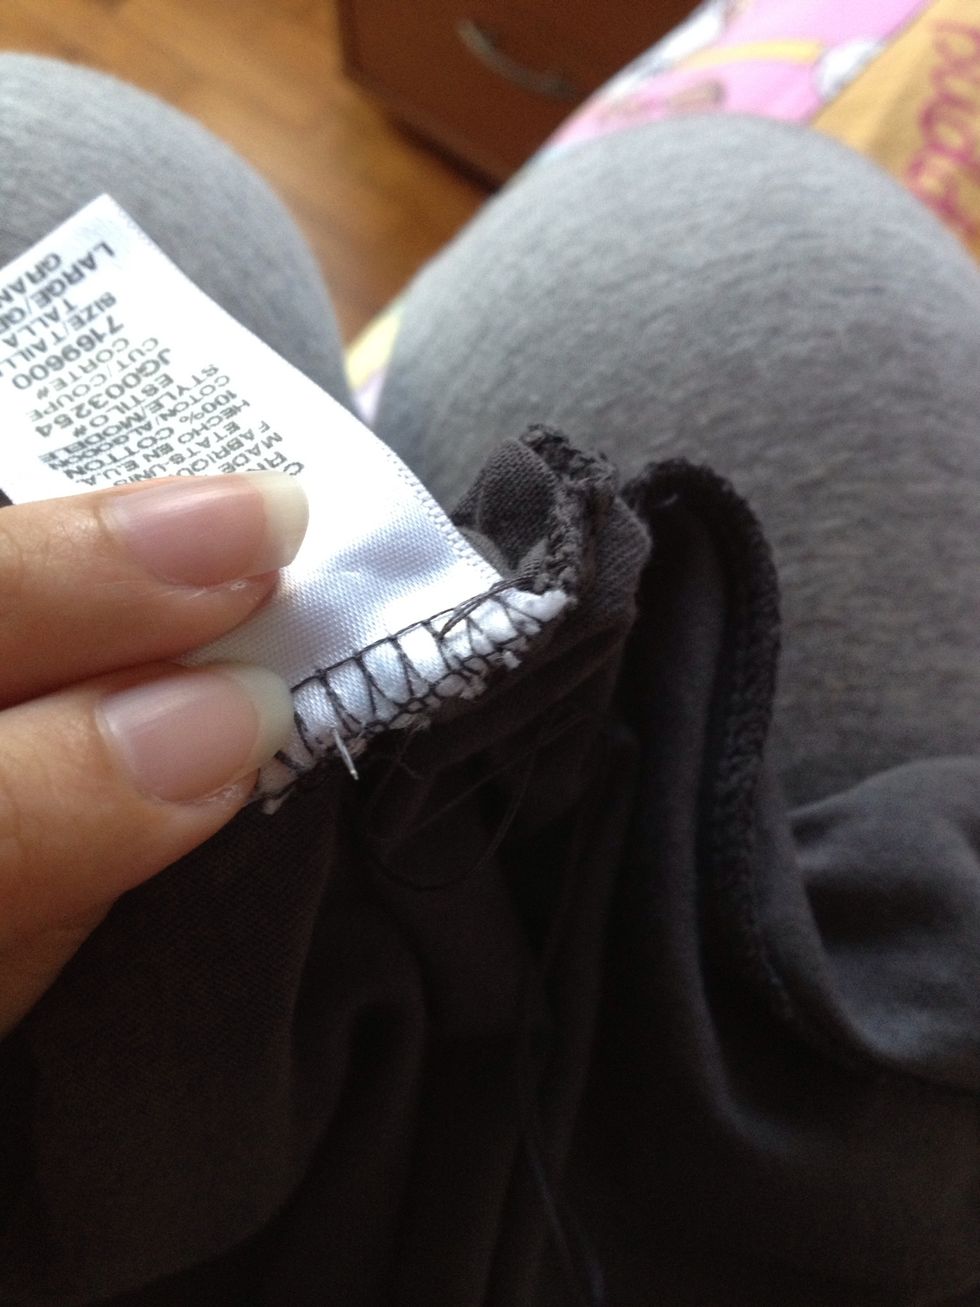 When you reach the clothes tag, do an evenly spaced stitch as per normal.